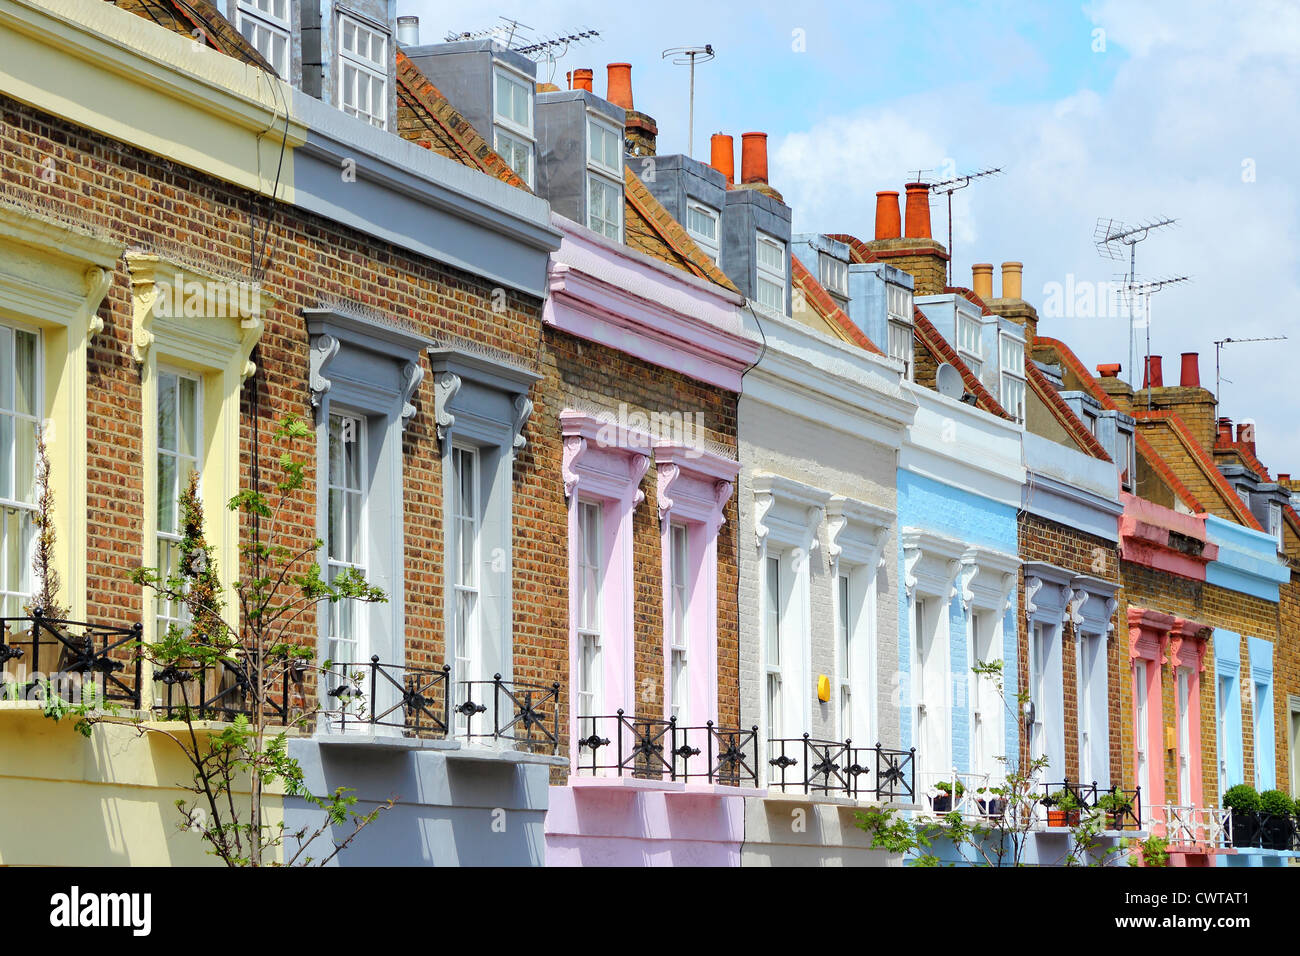 London, United Kingdom - colorful houses in Camden Town district. Stock Photo